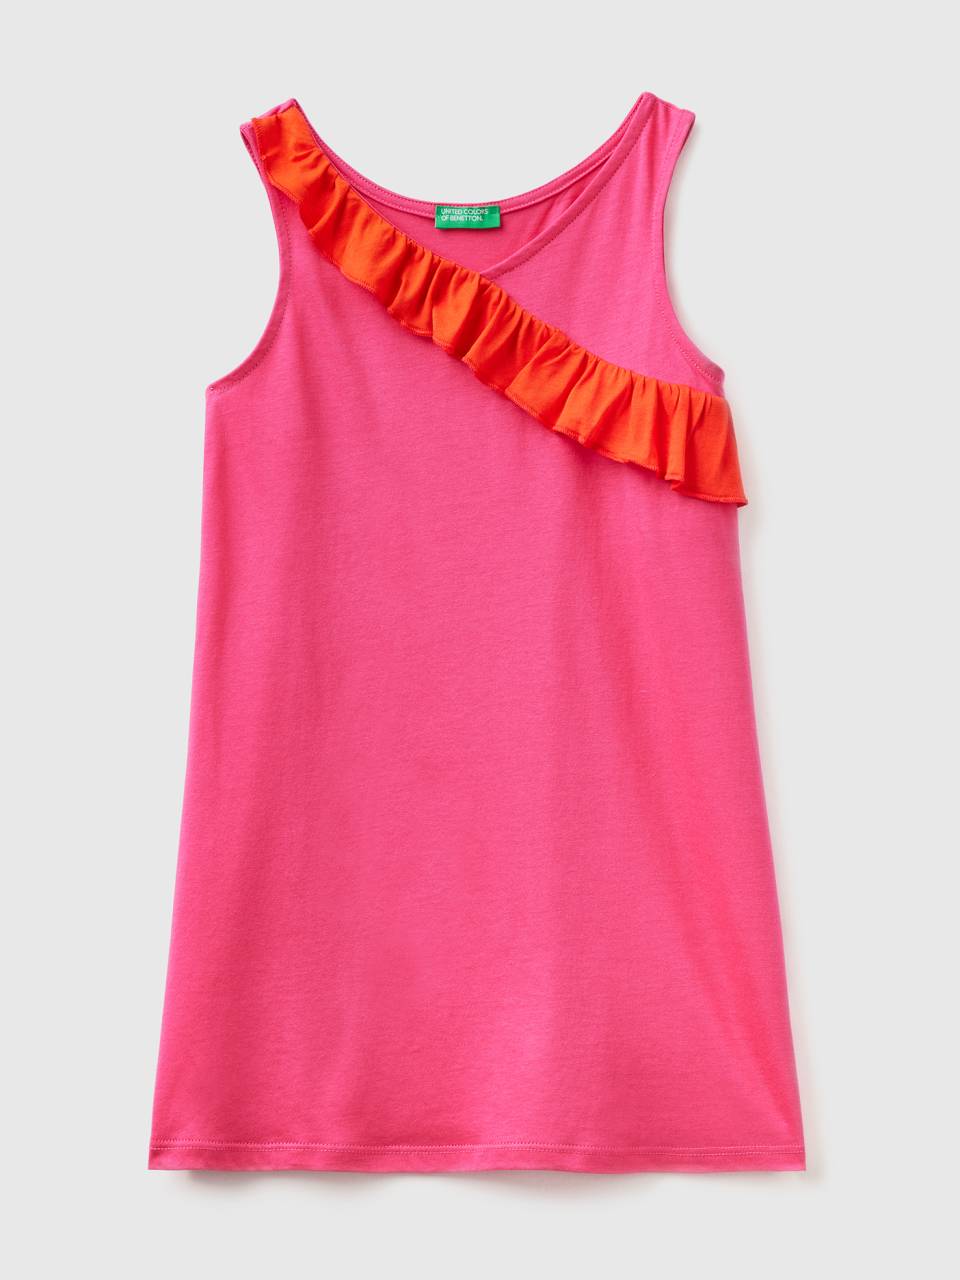 Benetton dress with frill. 1